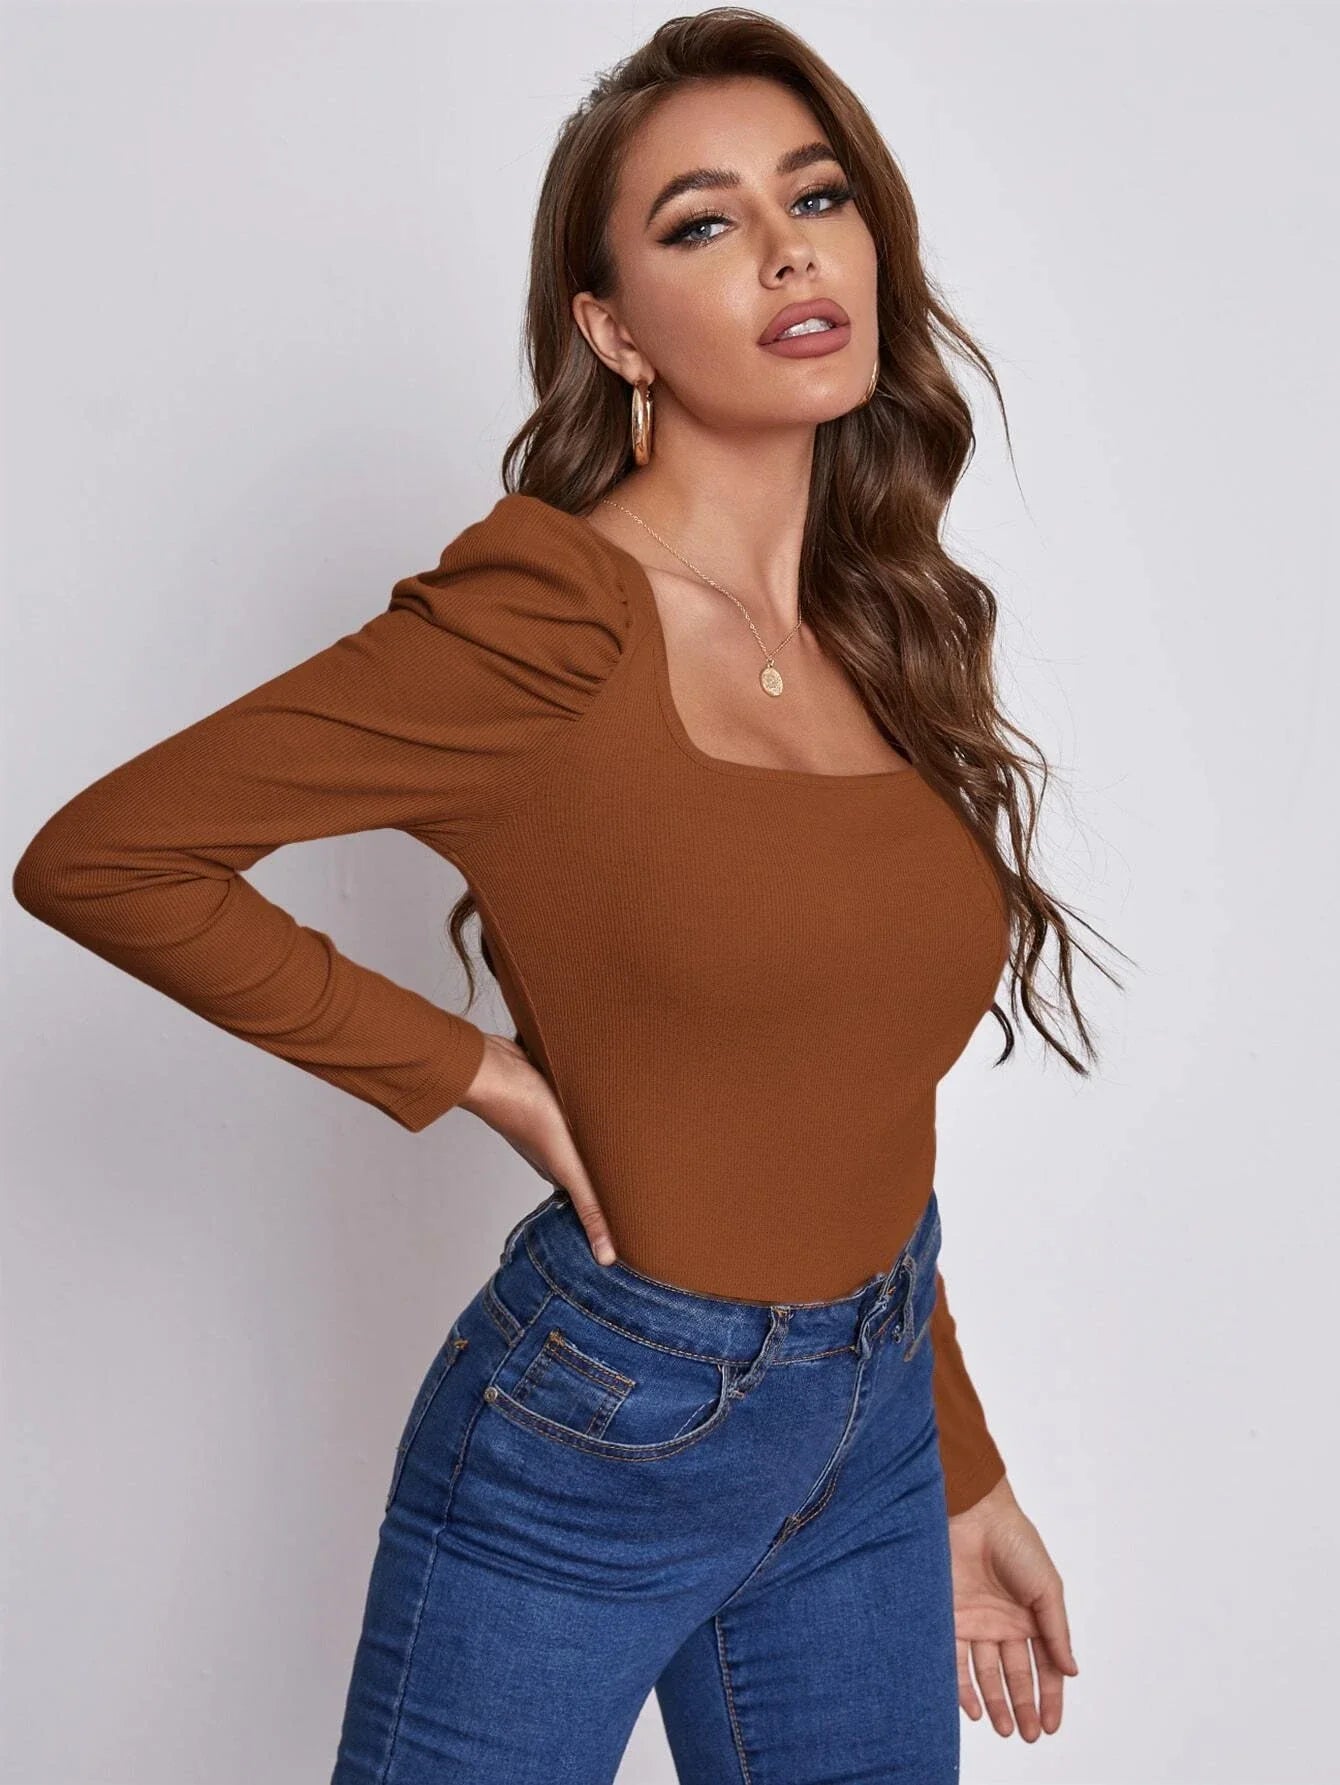 Buy Shein Emery Rose Square Neck Leg Of Mutton Sleeve Top in Pakistan